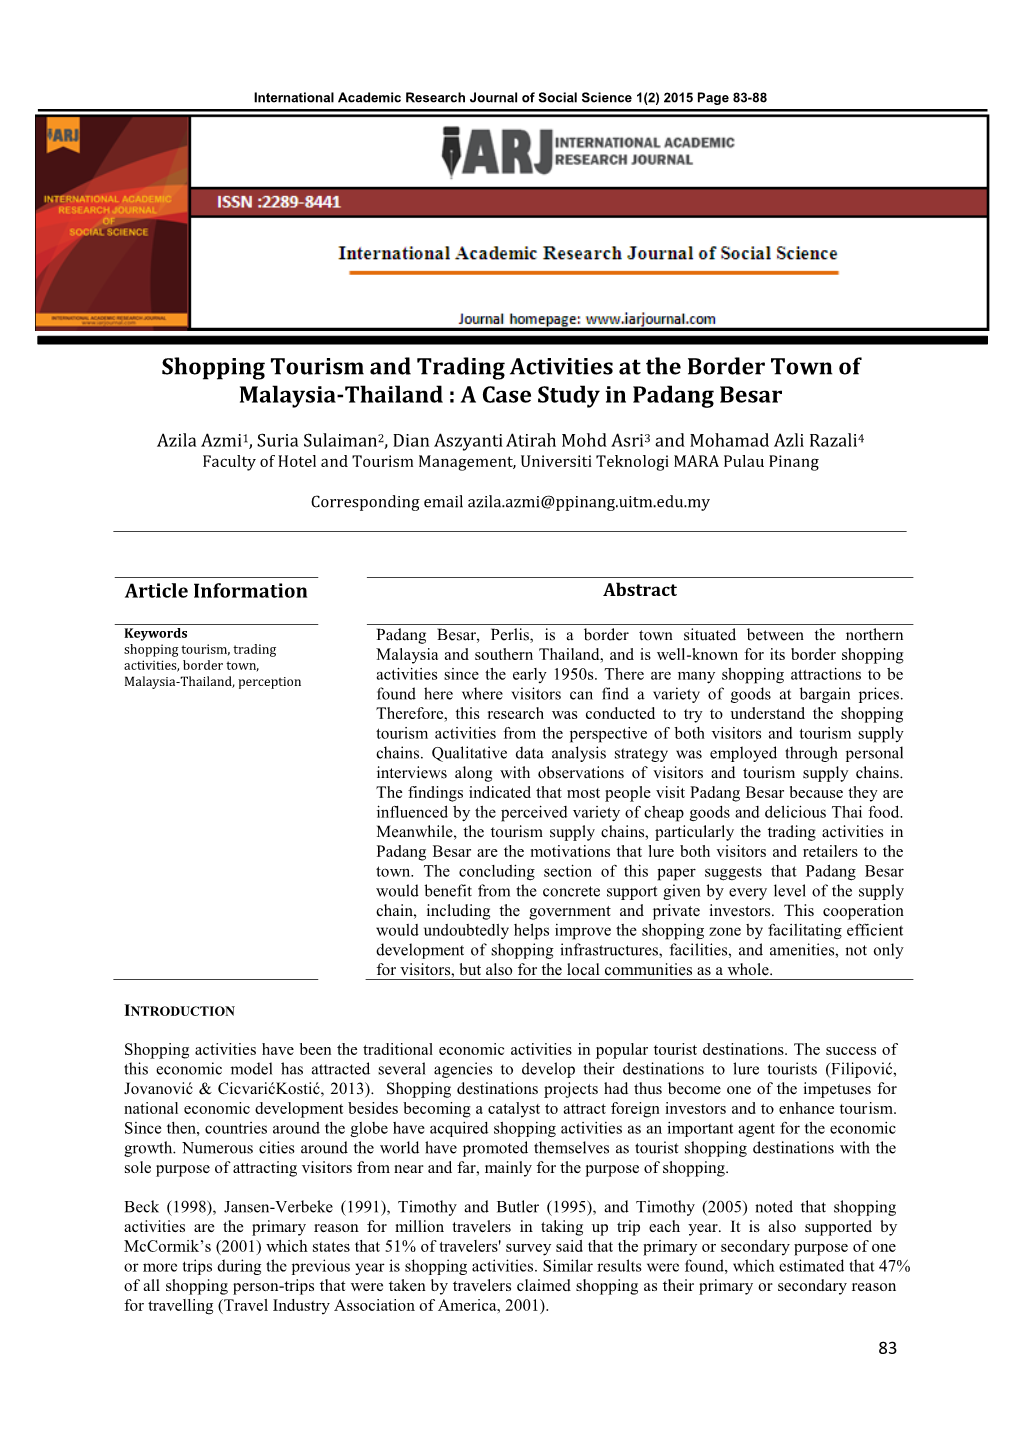 Shopping Tourism and Trading Activities at the Border Town of Malaysia-Thailand : a Case Study in Padang Besar